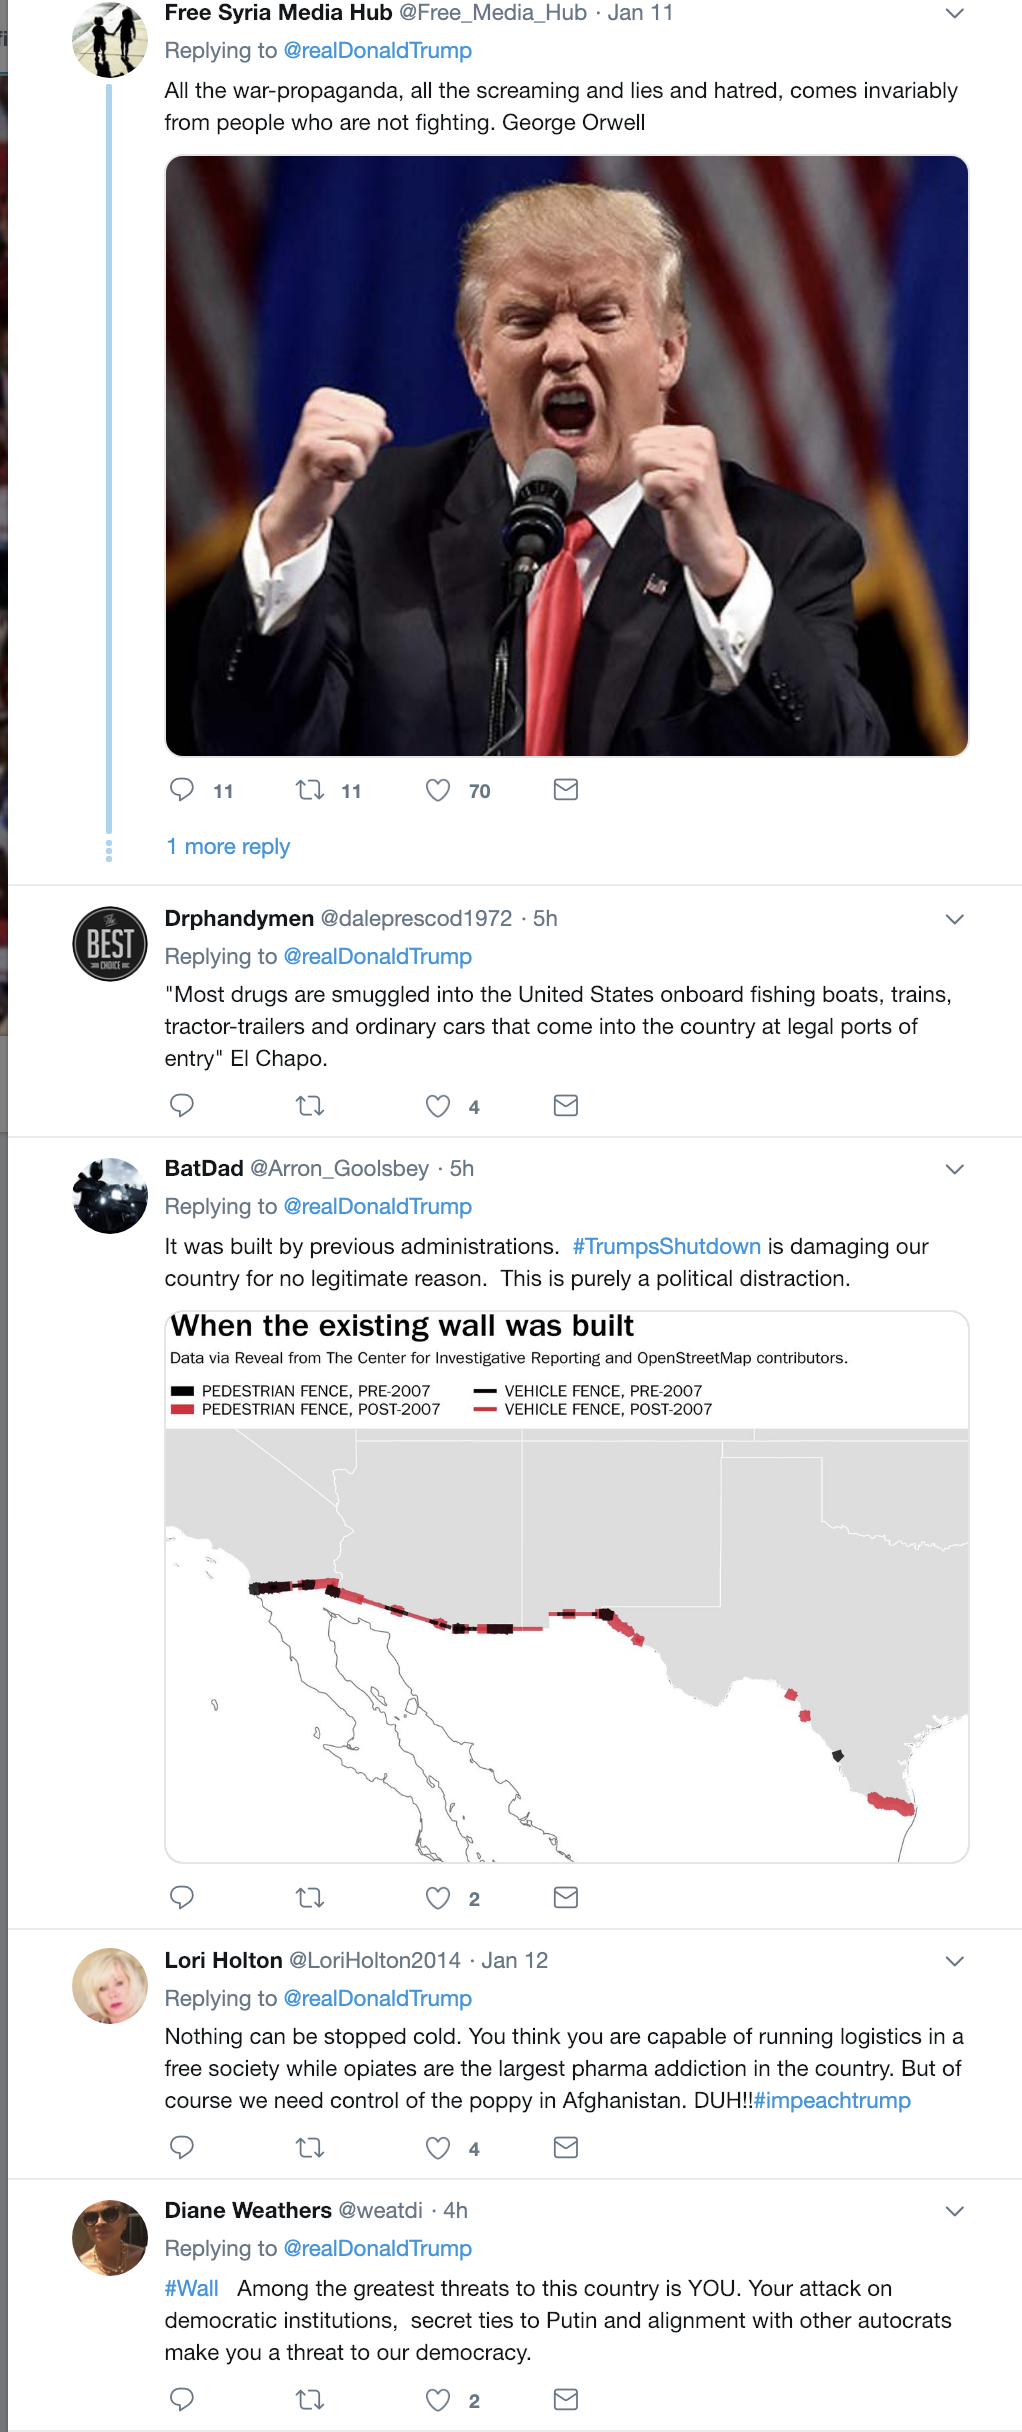 Screen-Shot-2019-01-13-at-3.50.36-PM Infamous Drug Traffickers Deliver Harsh Blow To Trump's Border Wall During Trial Corruption Crime Donald Trump Mueller Politics Robert Mueller Russia Top Stories 